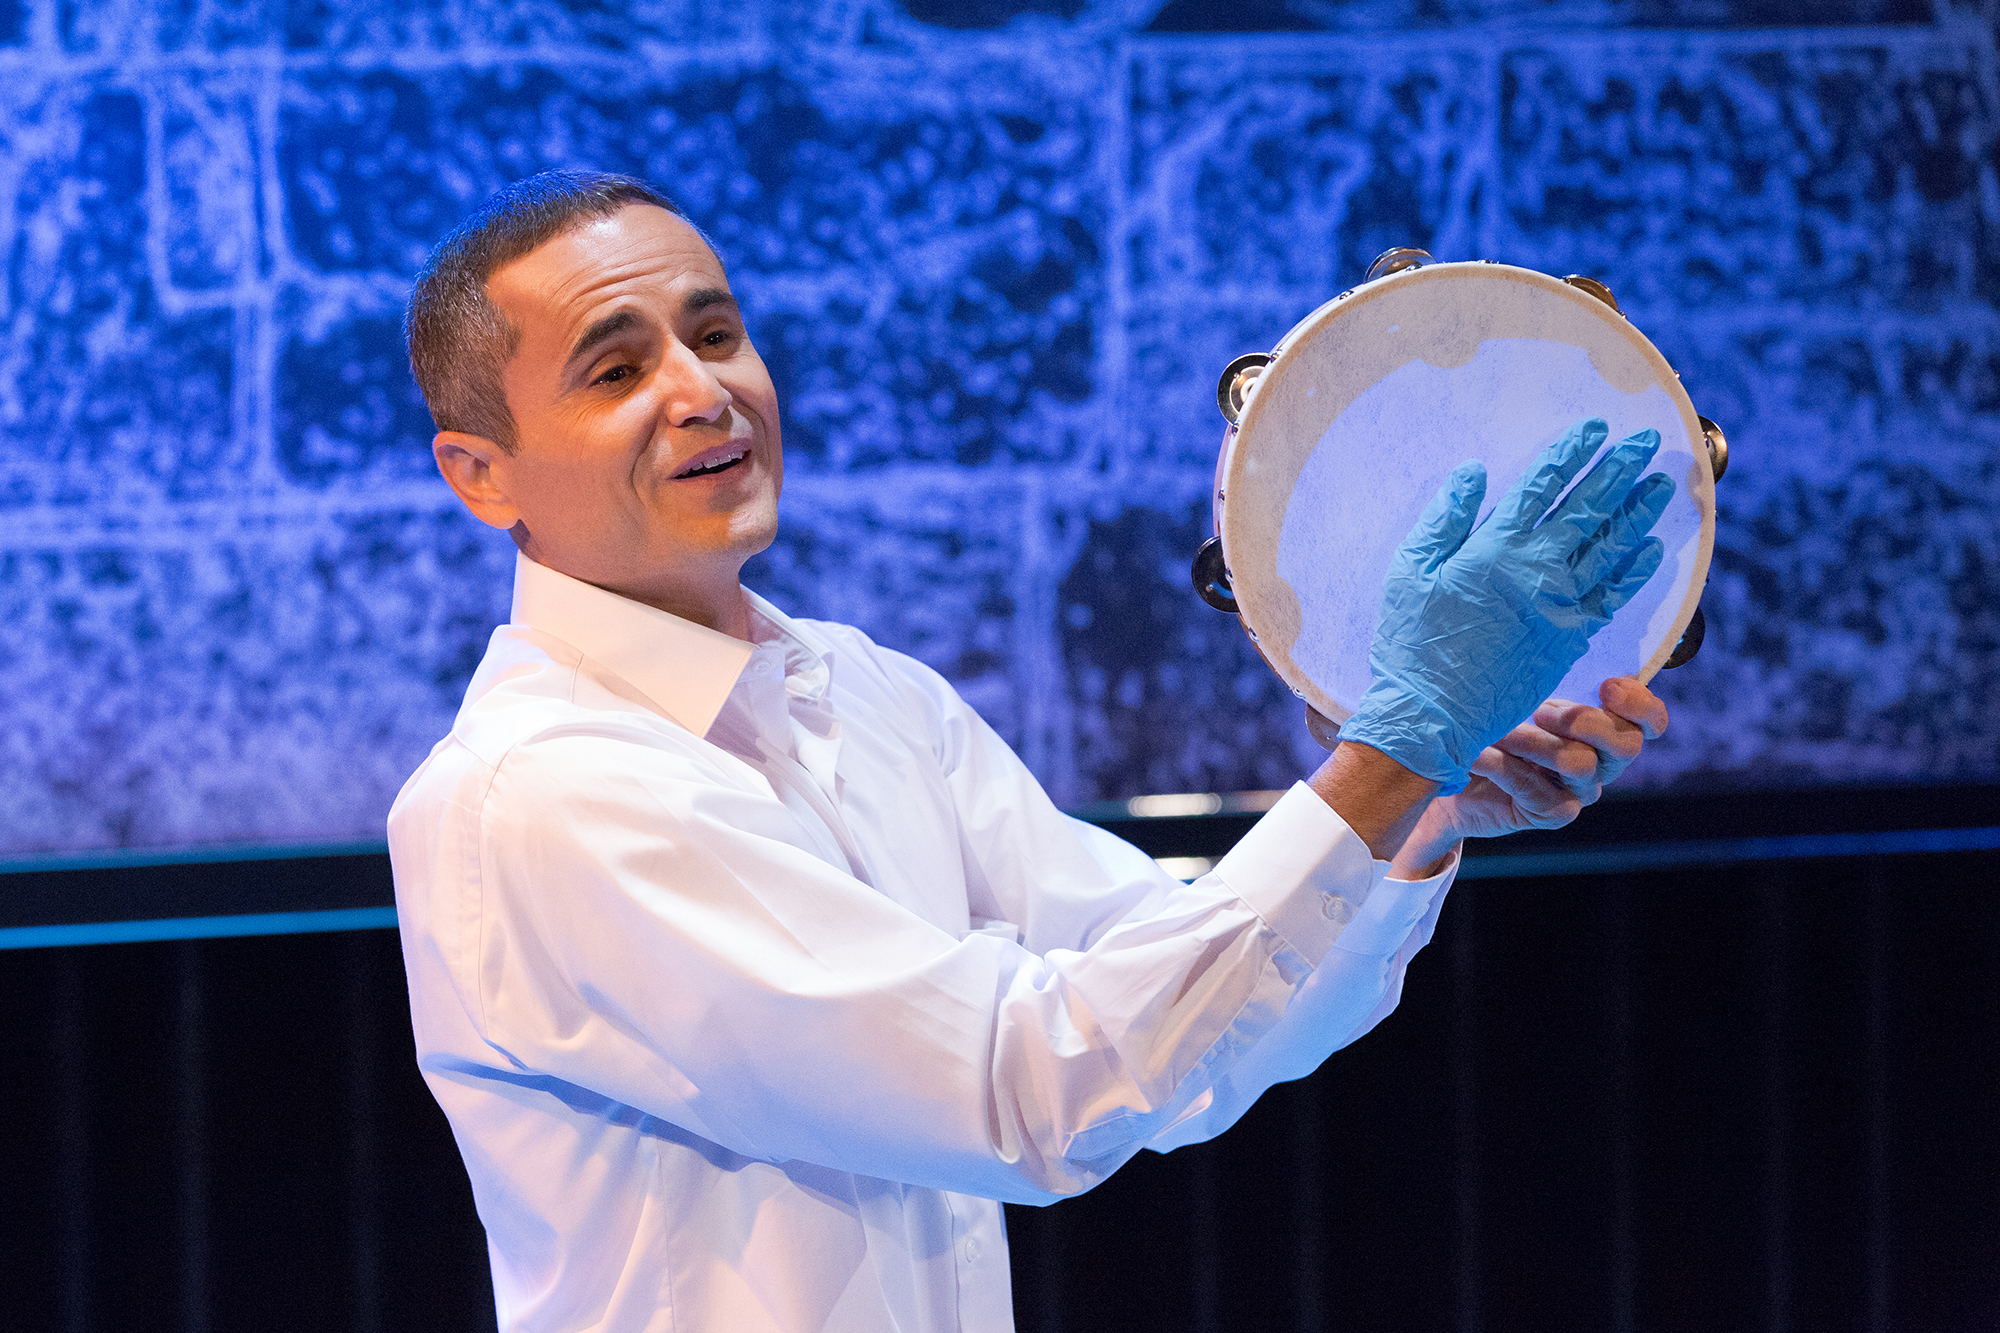 Ibrahim Miari performing on stage wearing a latex glove and holding a drum.